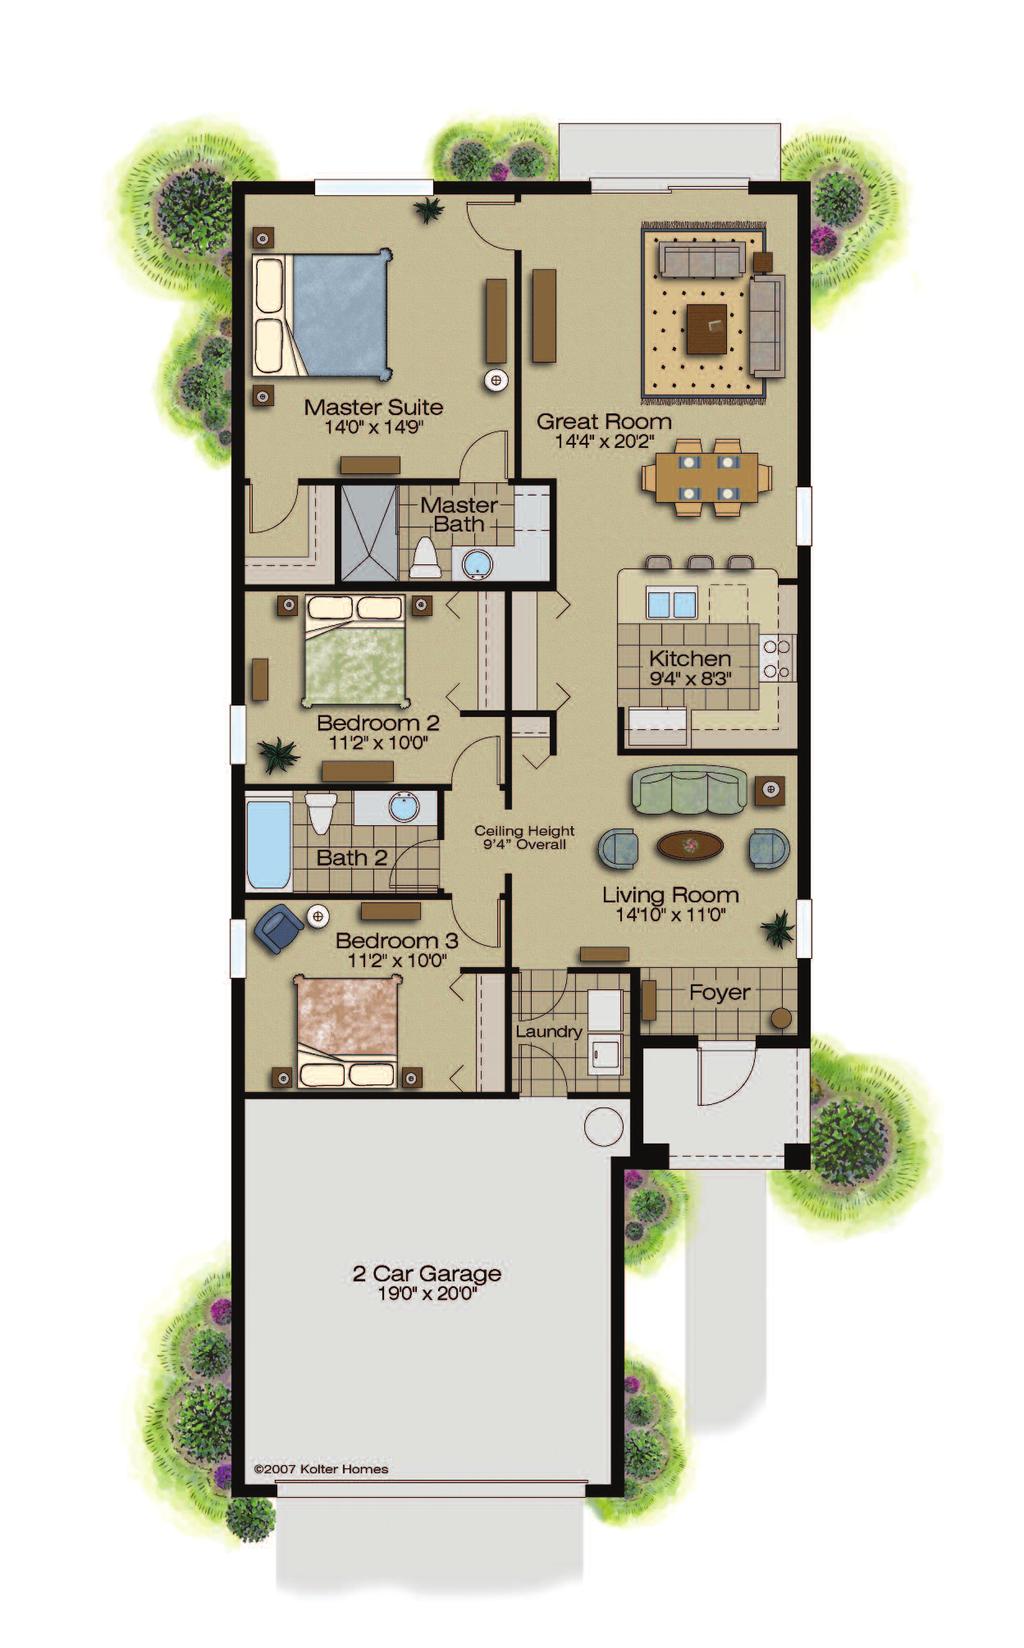 The Alicia 3 Bedroom, 2 Bathroom,,404 sf under air DRAFT ALL DIMENSIONS, FEATURES AND SQUARE